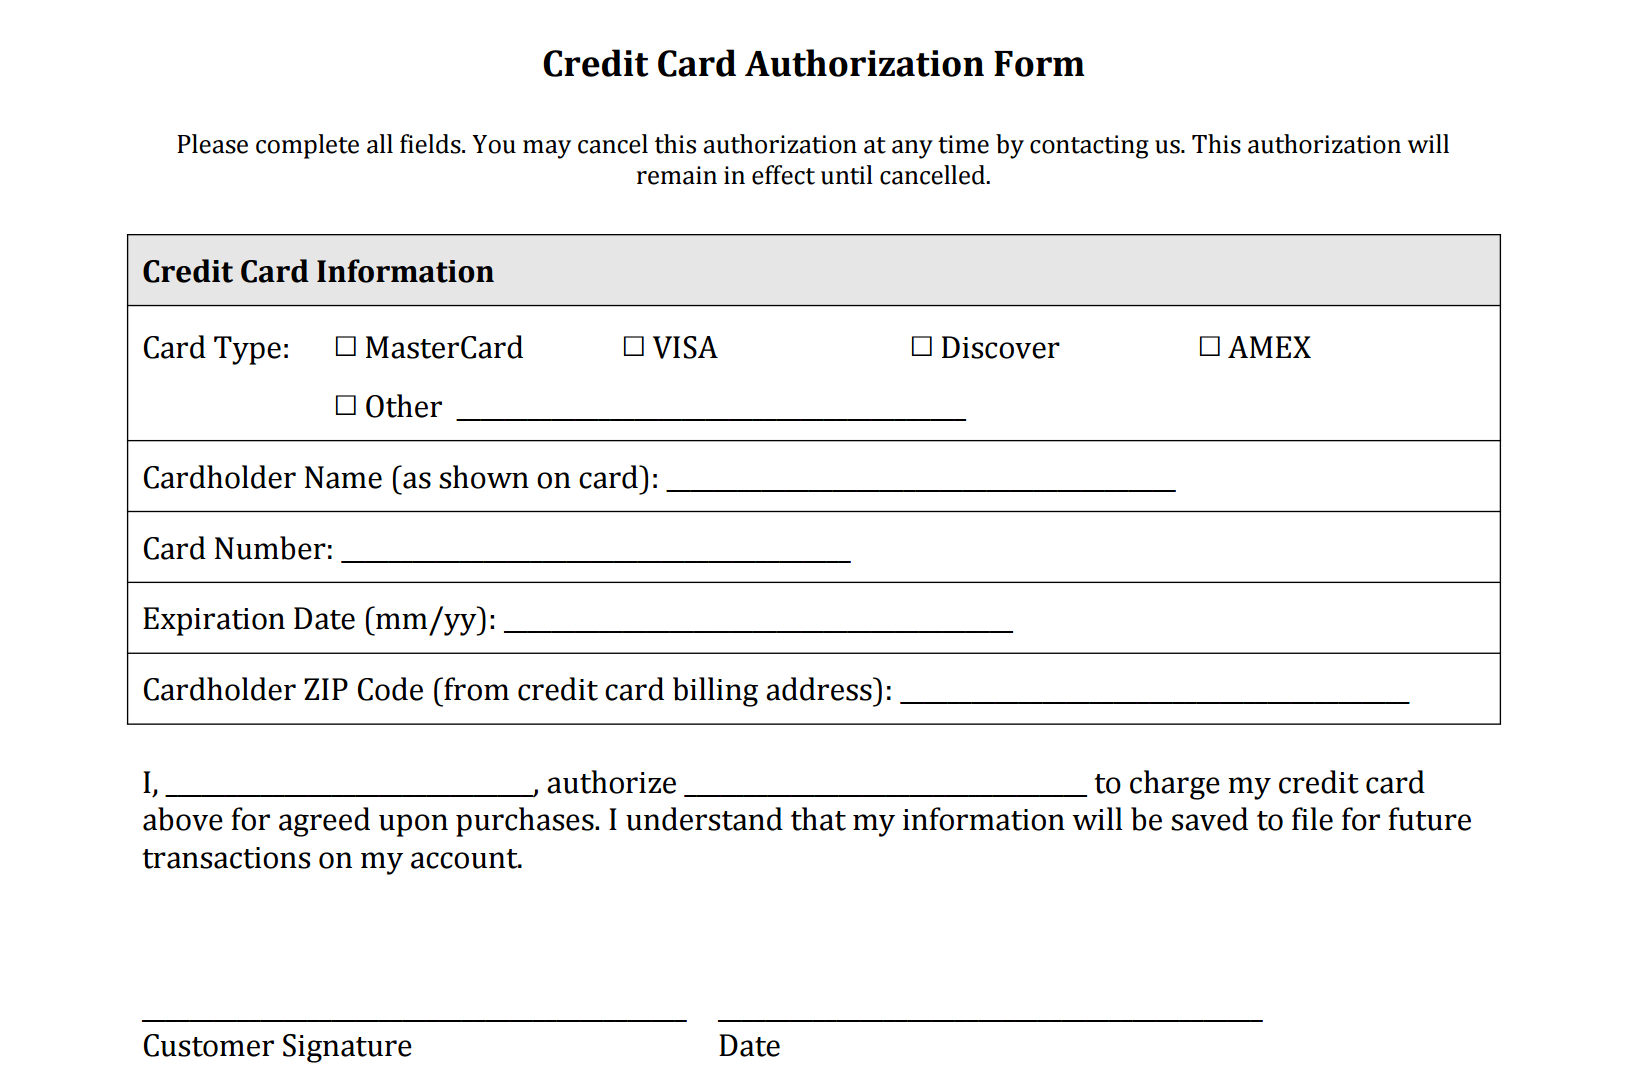 Free Credit Card Authorization Form Template - Calep Within Credit Card Authorization Form Template Word